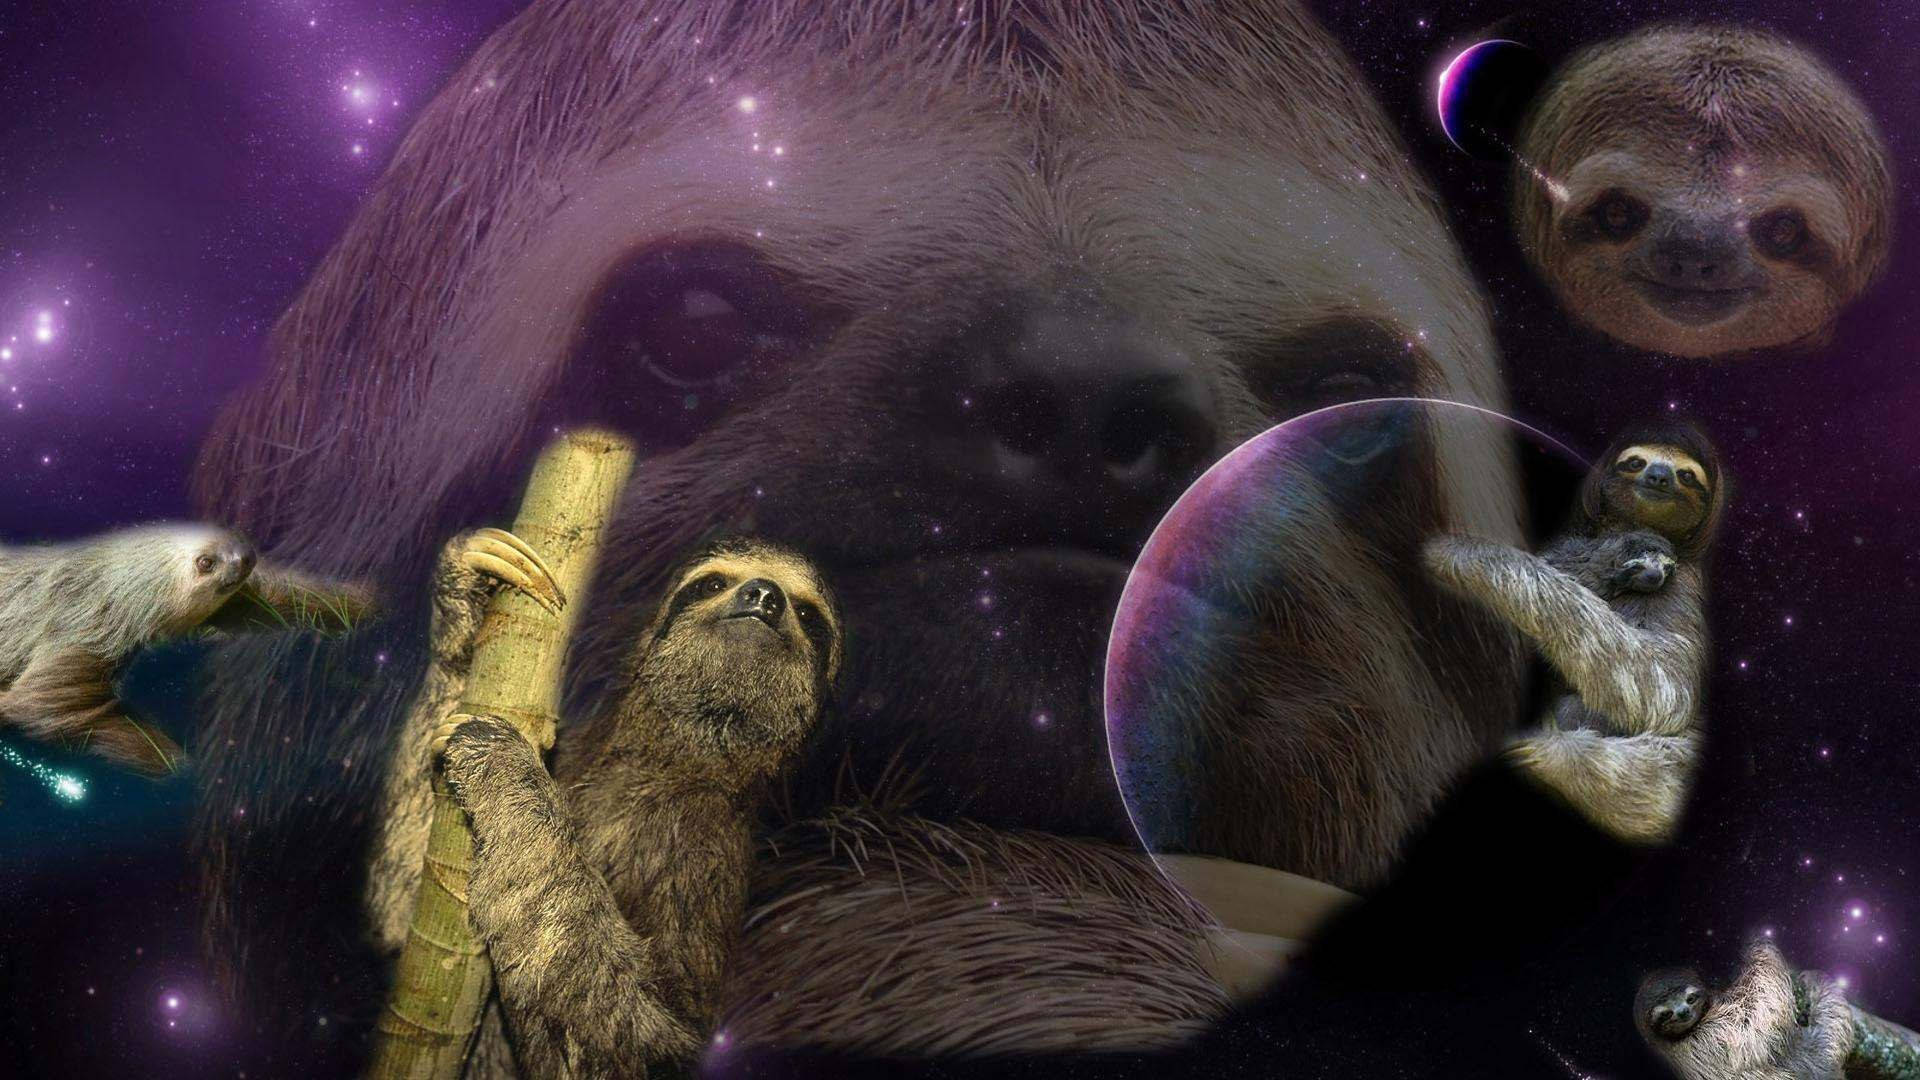 Weird Sloth In The Universe Wallpaper